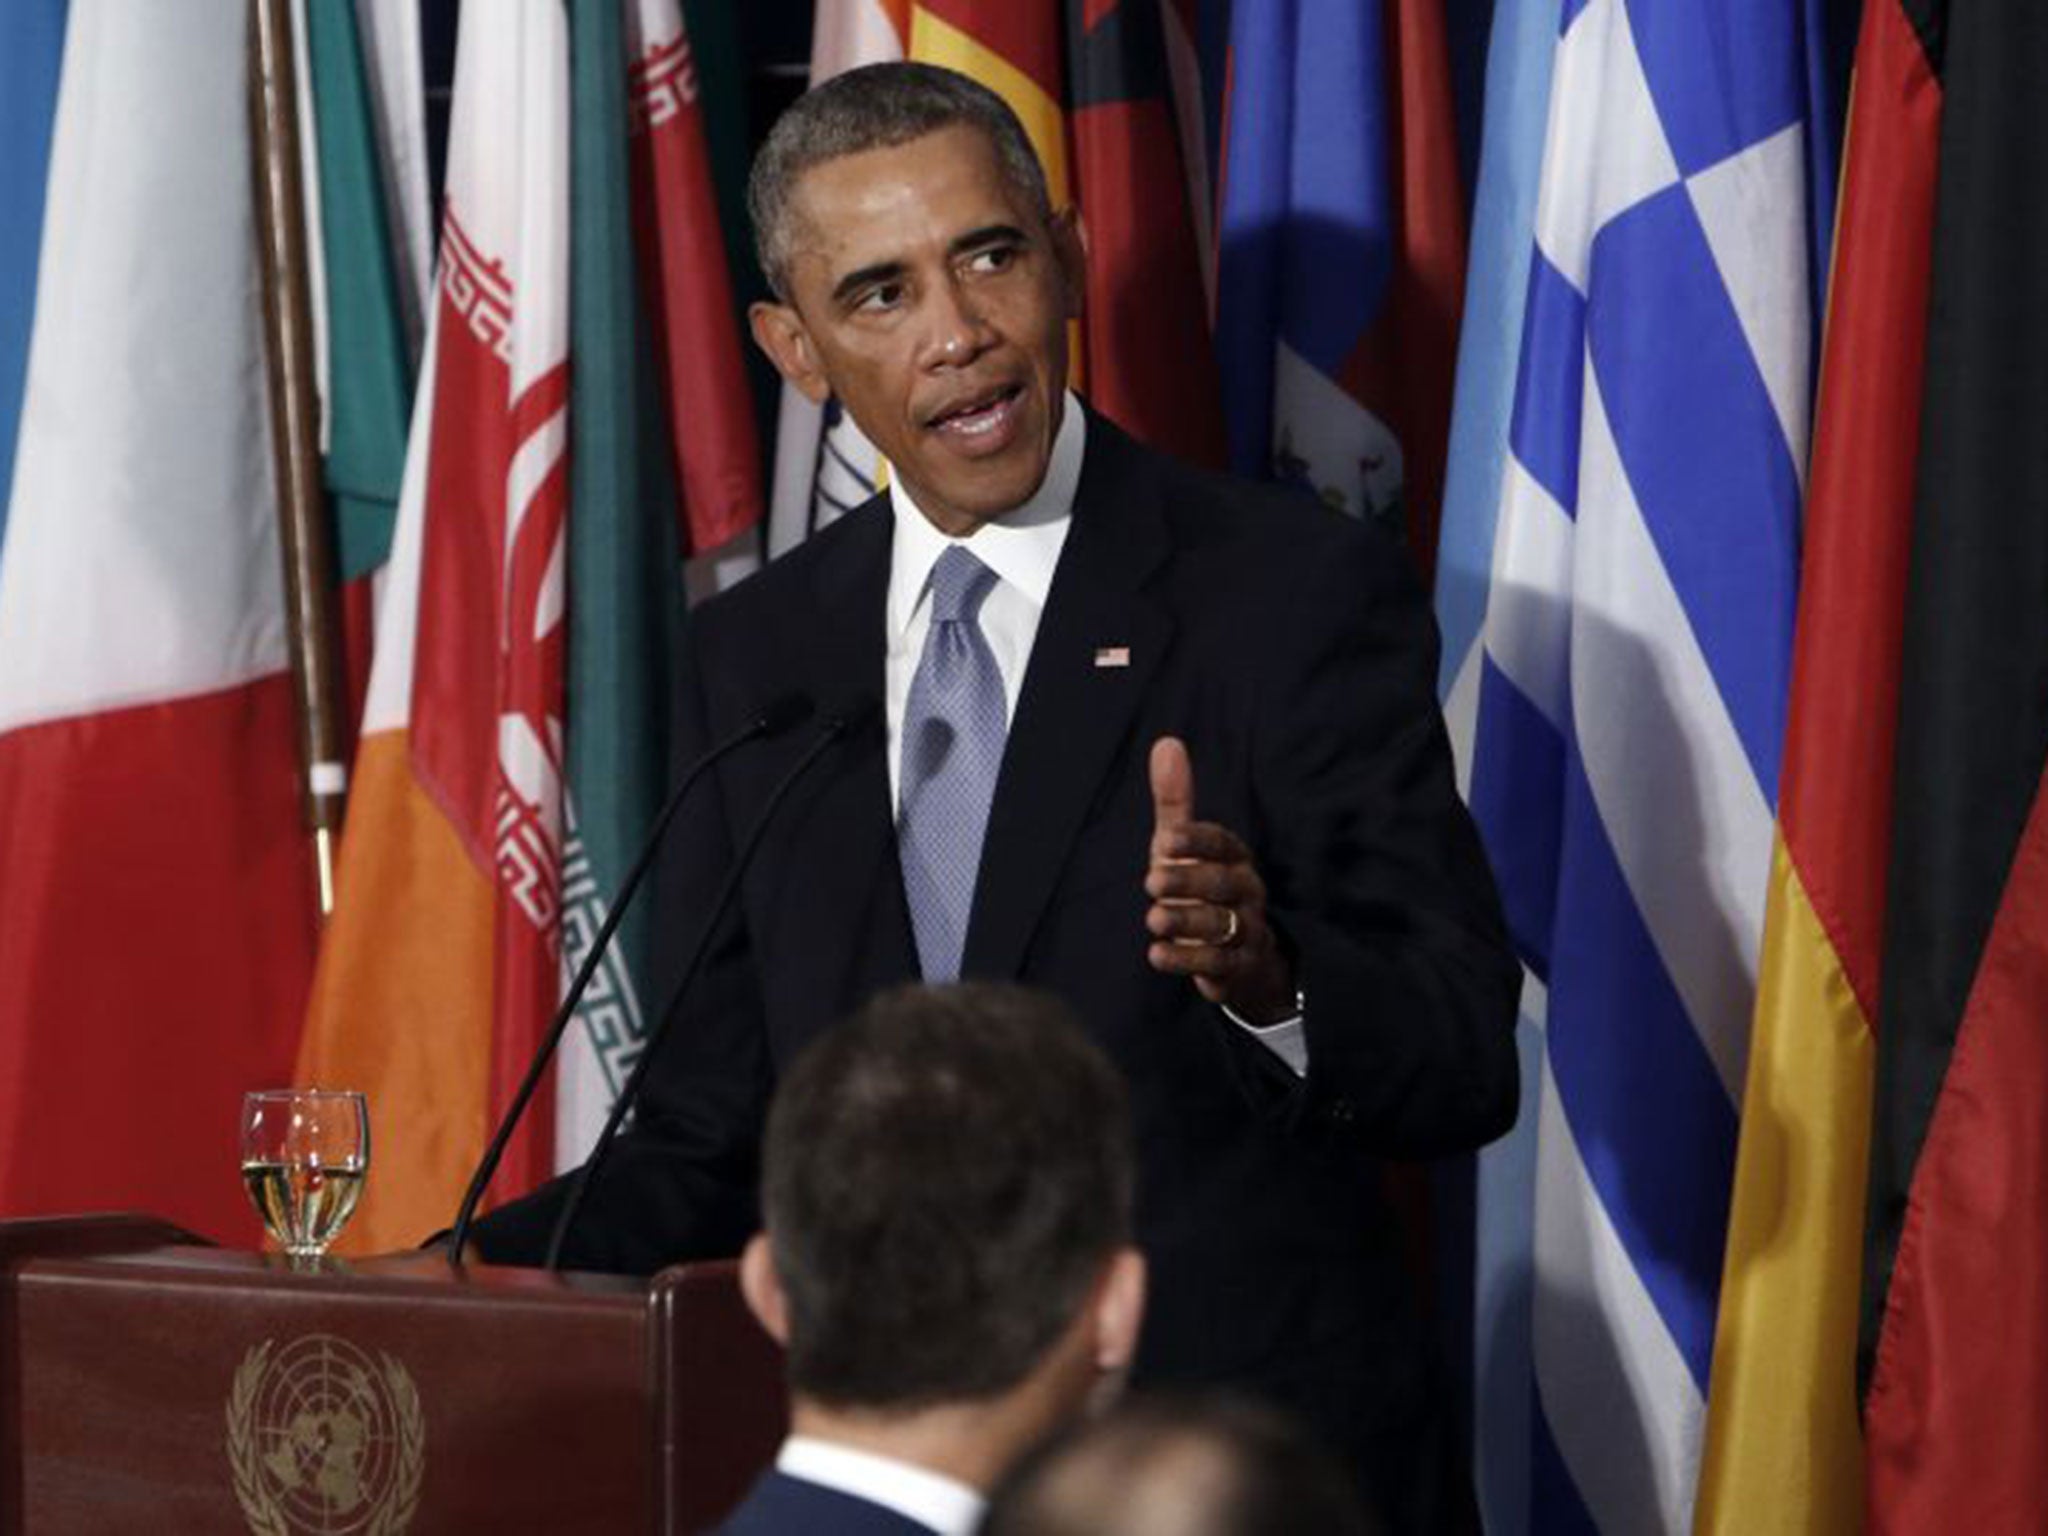 Mr Obama was uncompromising in his condemnation of ISIS in his address